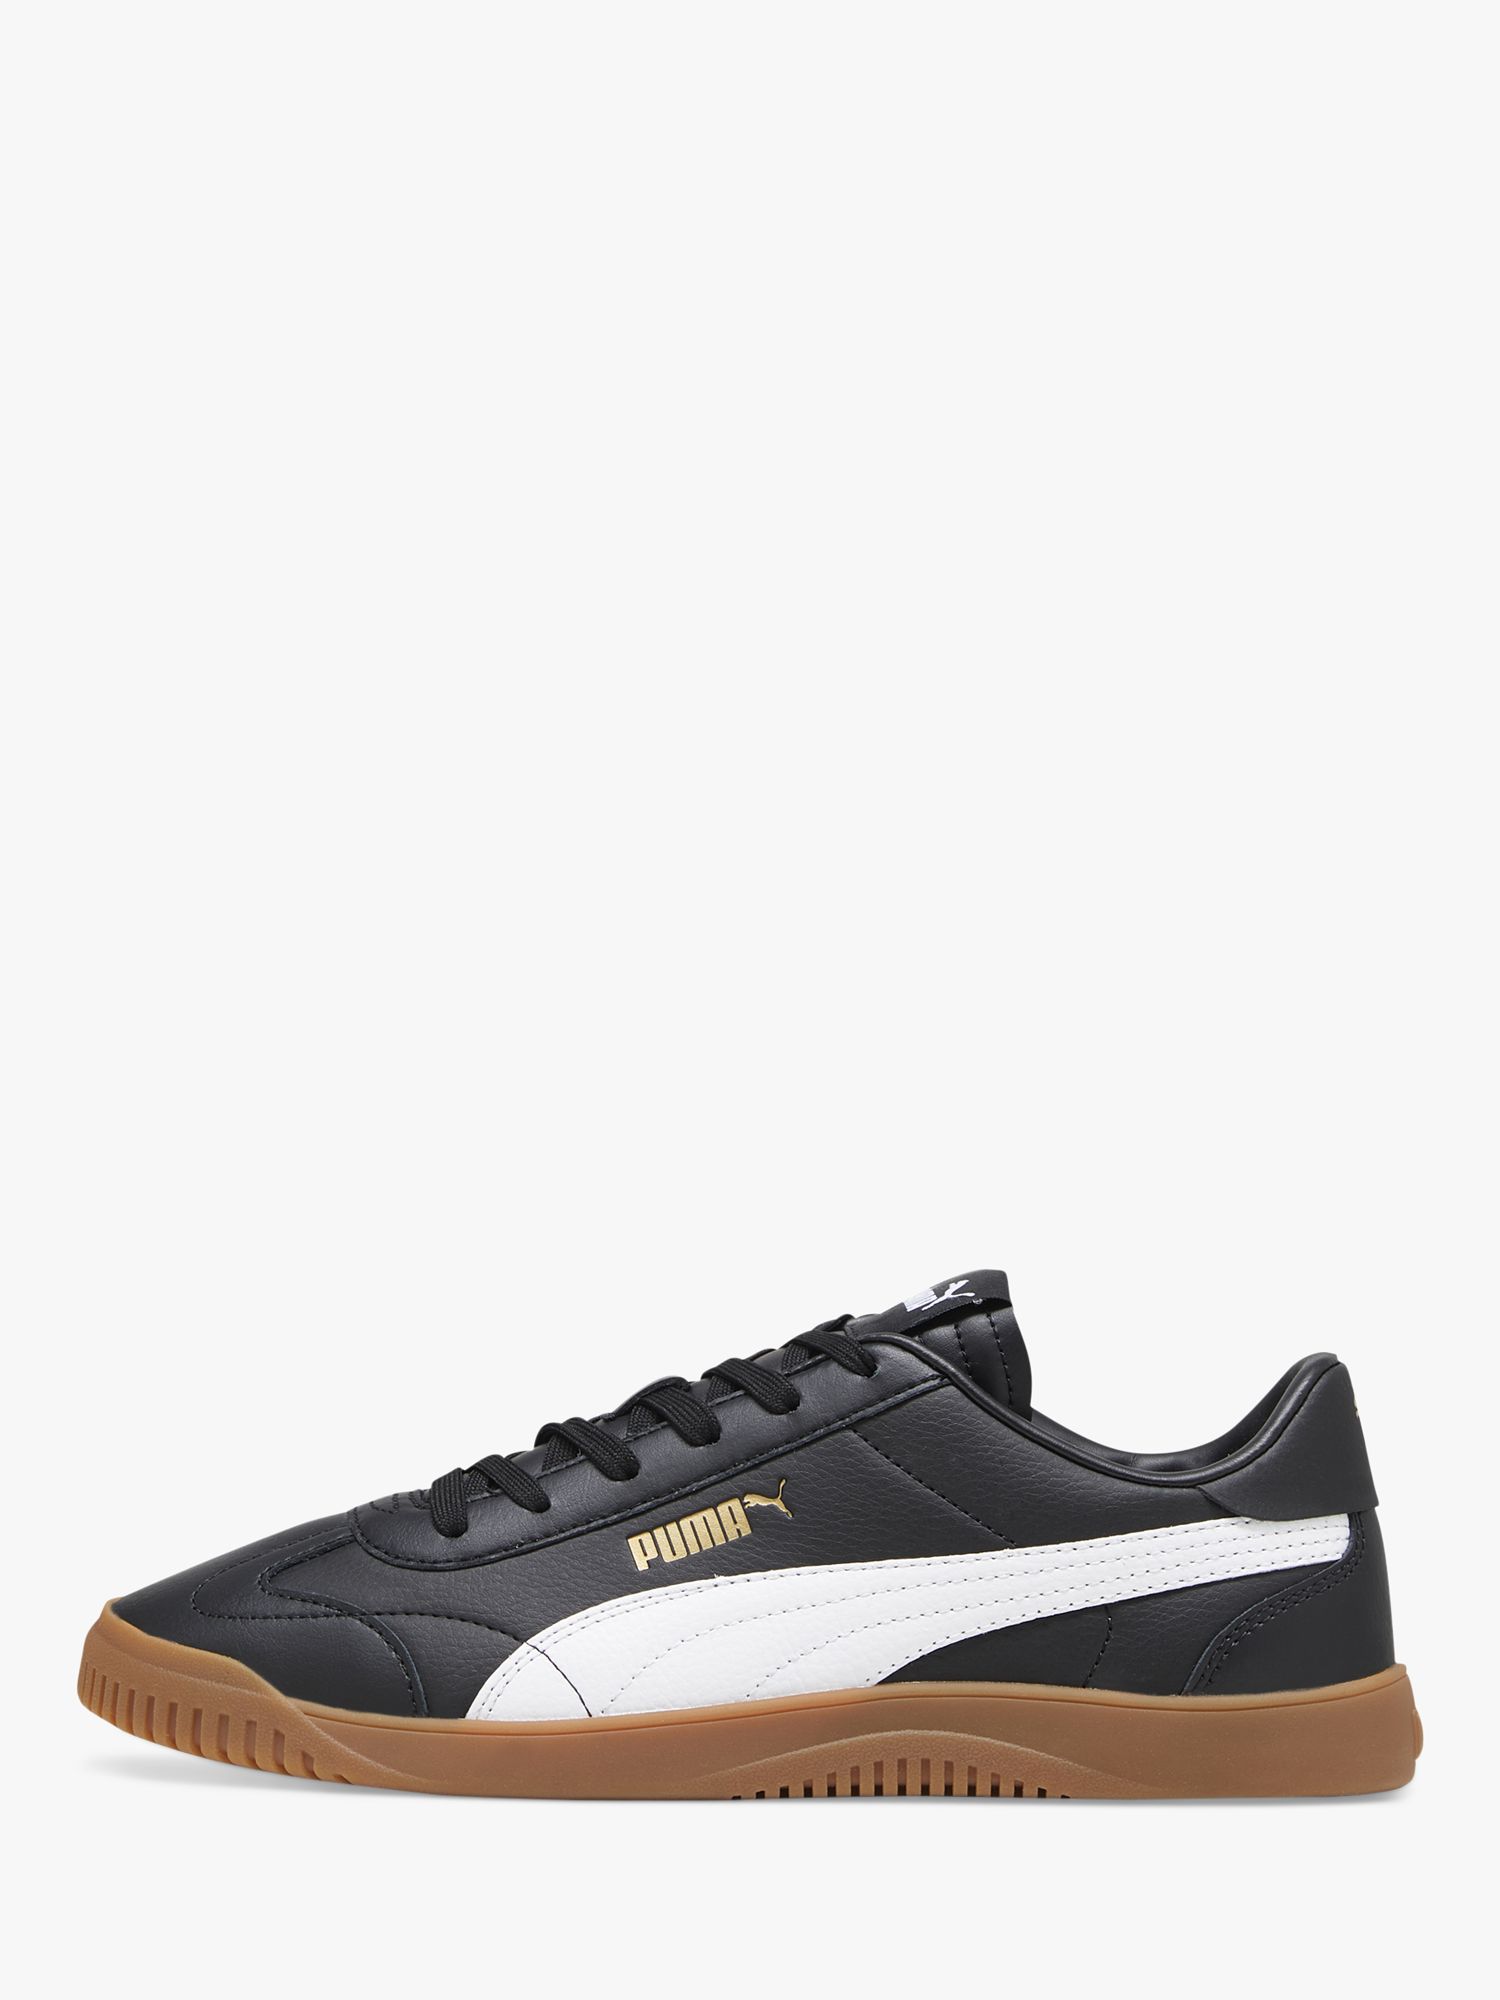 PUMA Club 5v5 Leather Lace Up Trainers, Black/White, 7